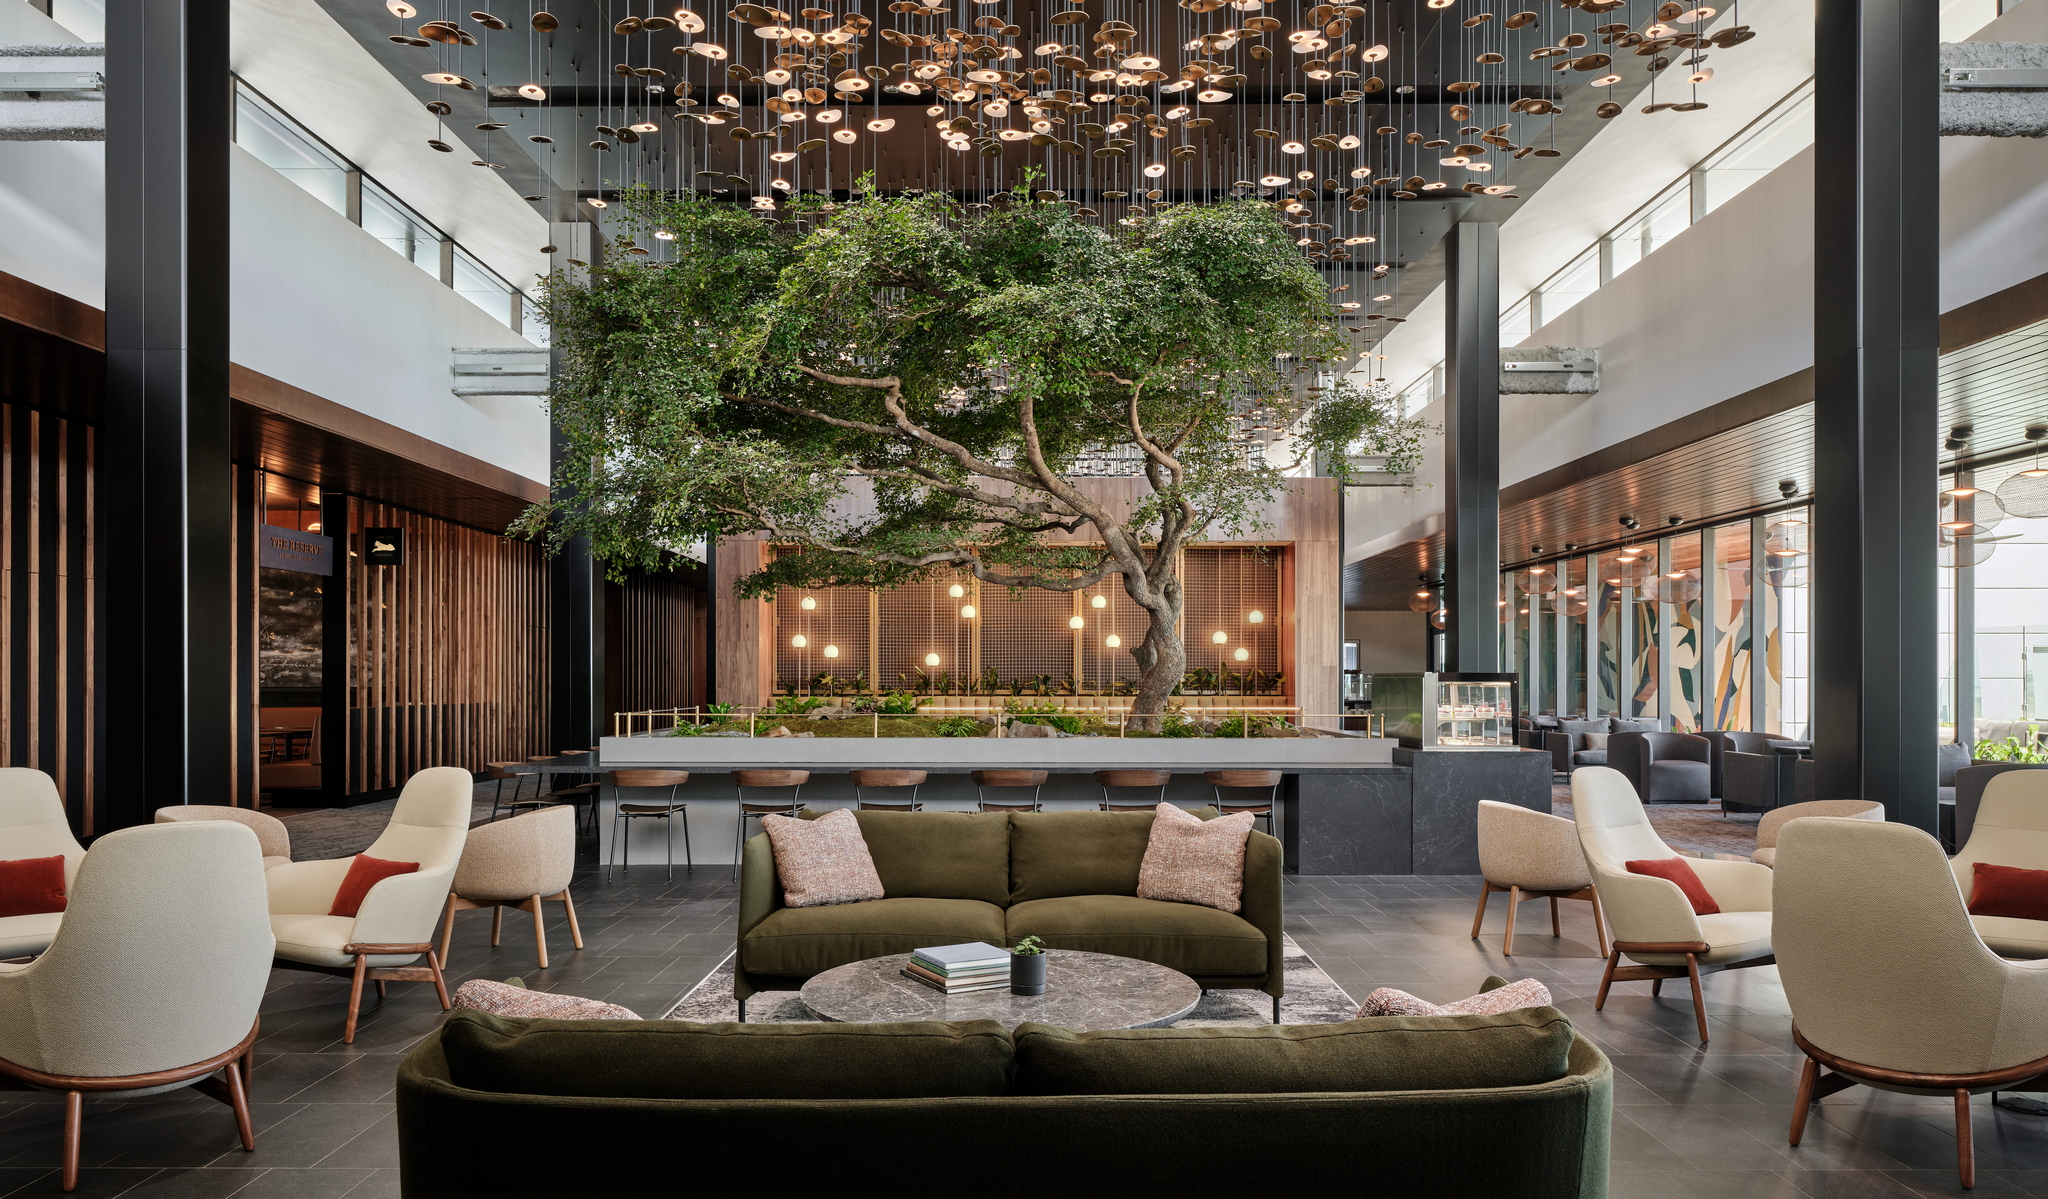 Olive tree and central lounge area for Atlanta Centurion lounge.